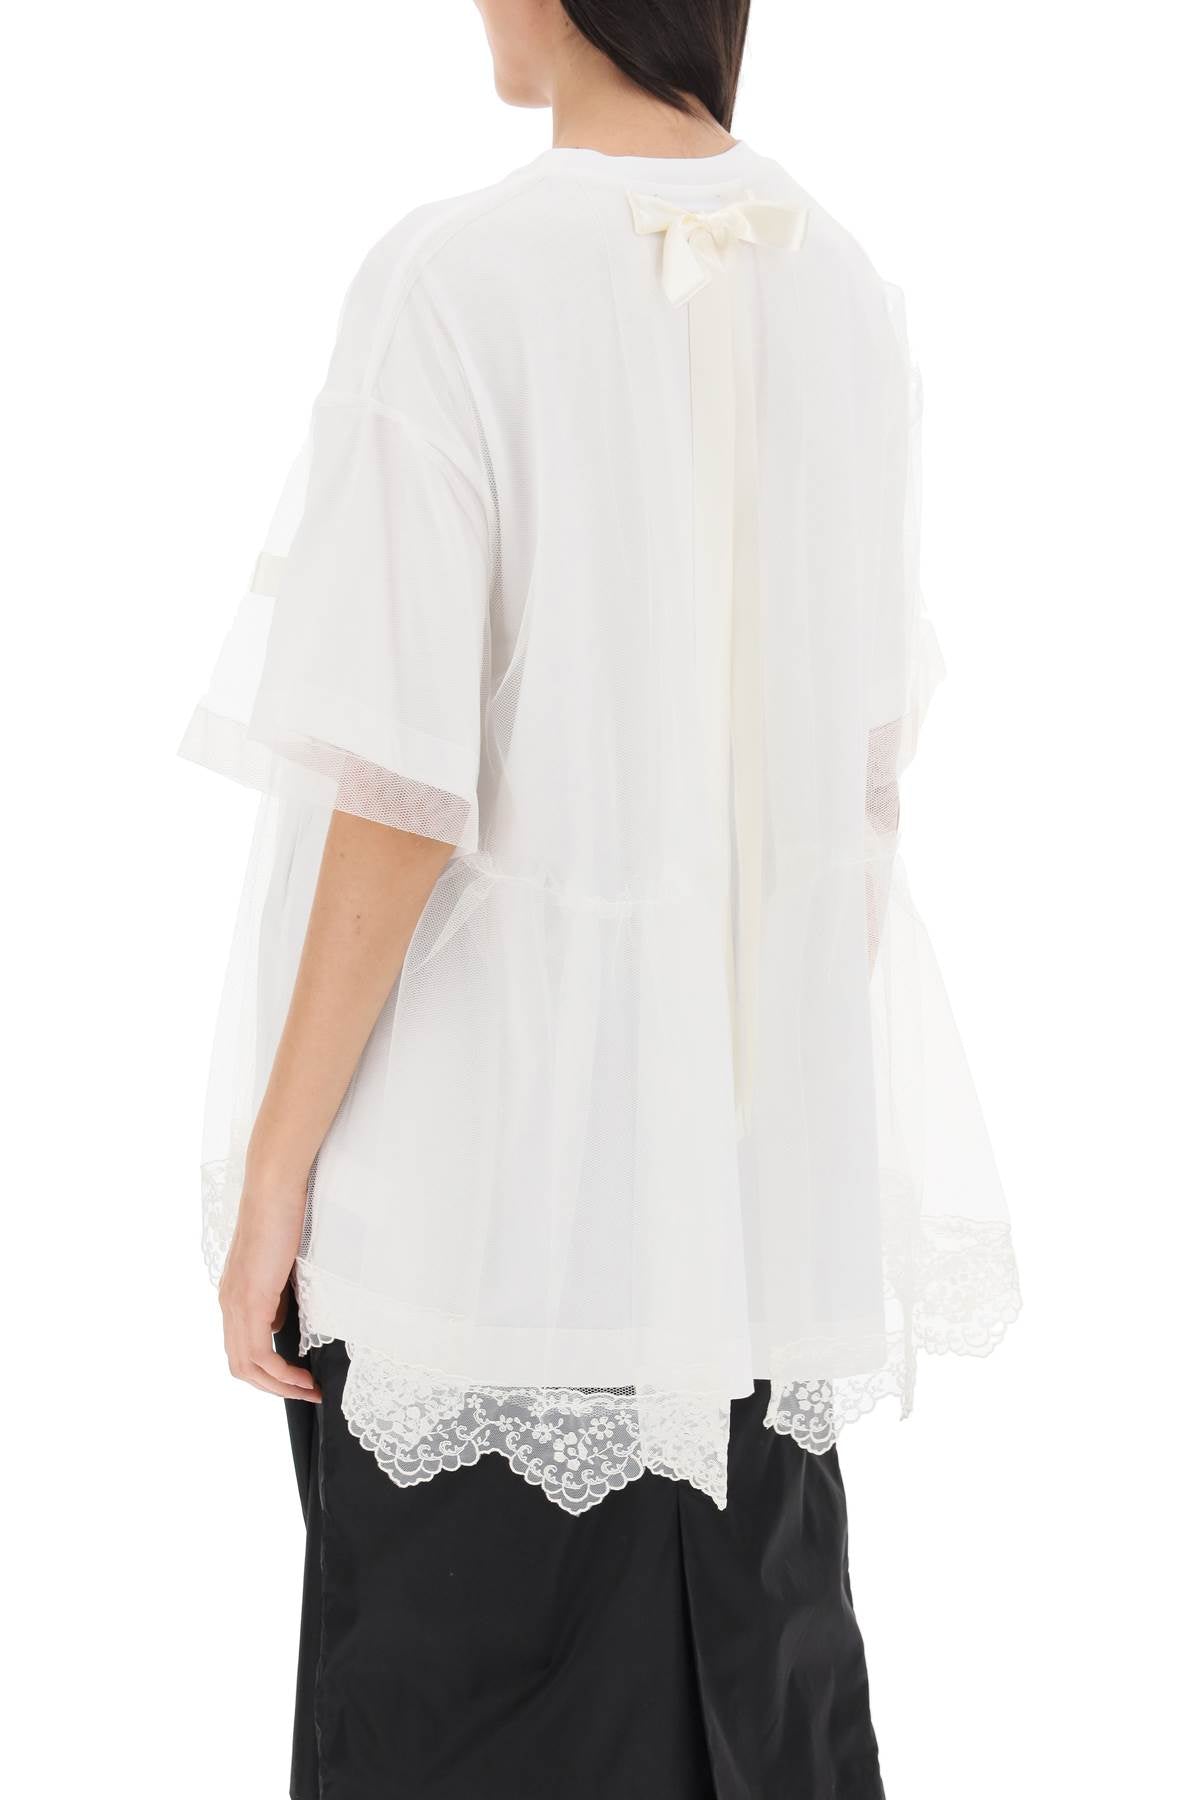 Simone rocha tulle top with lace and bows-2